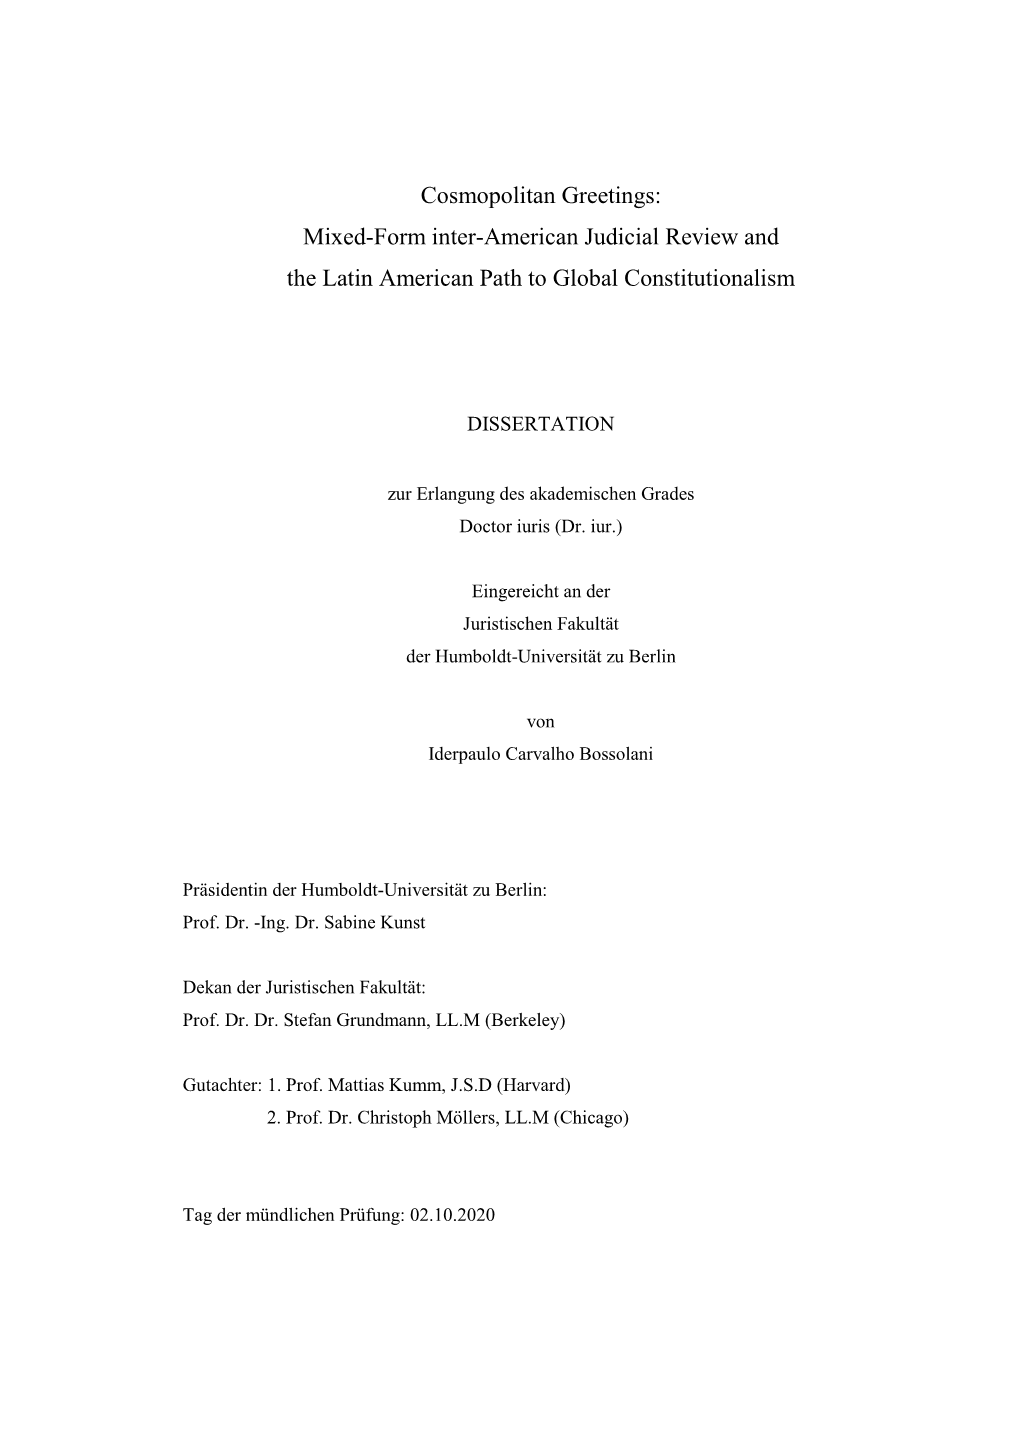 Mixed-Form Inter-American Judicial Review and the Latin American Path to Global Constitutionalism